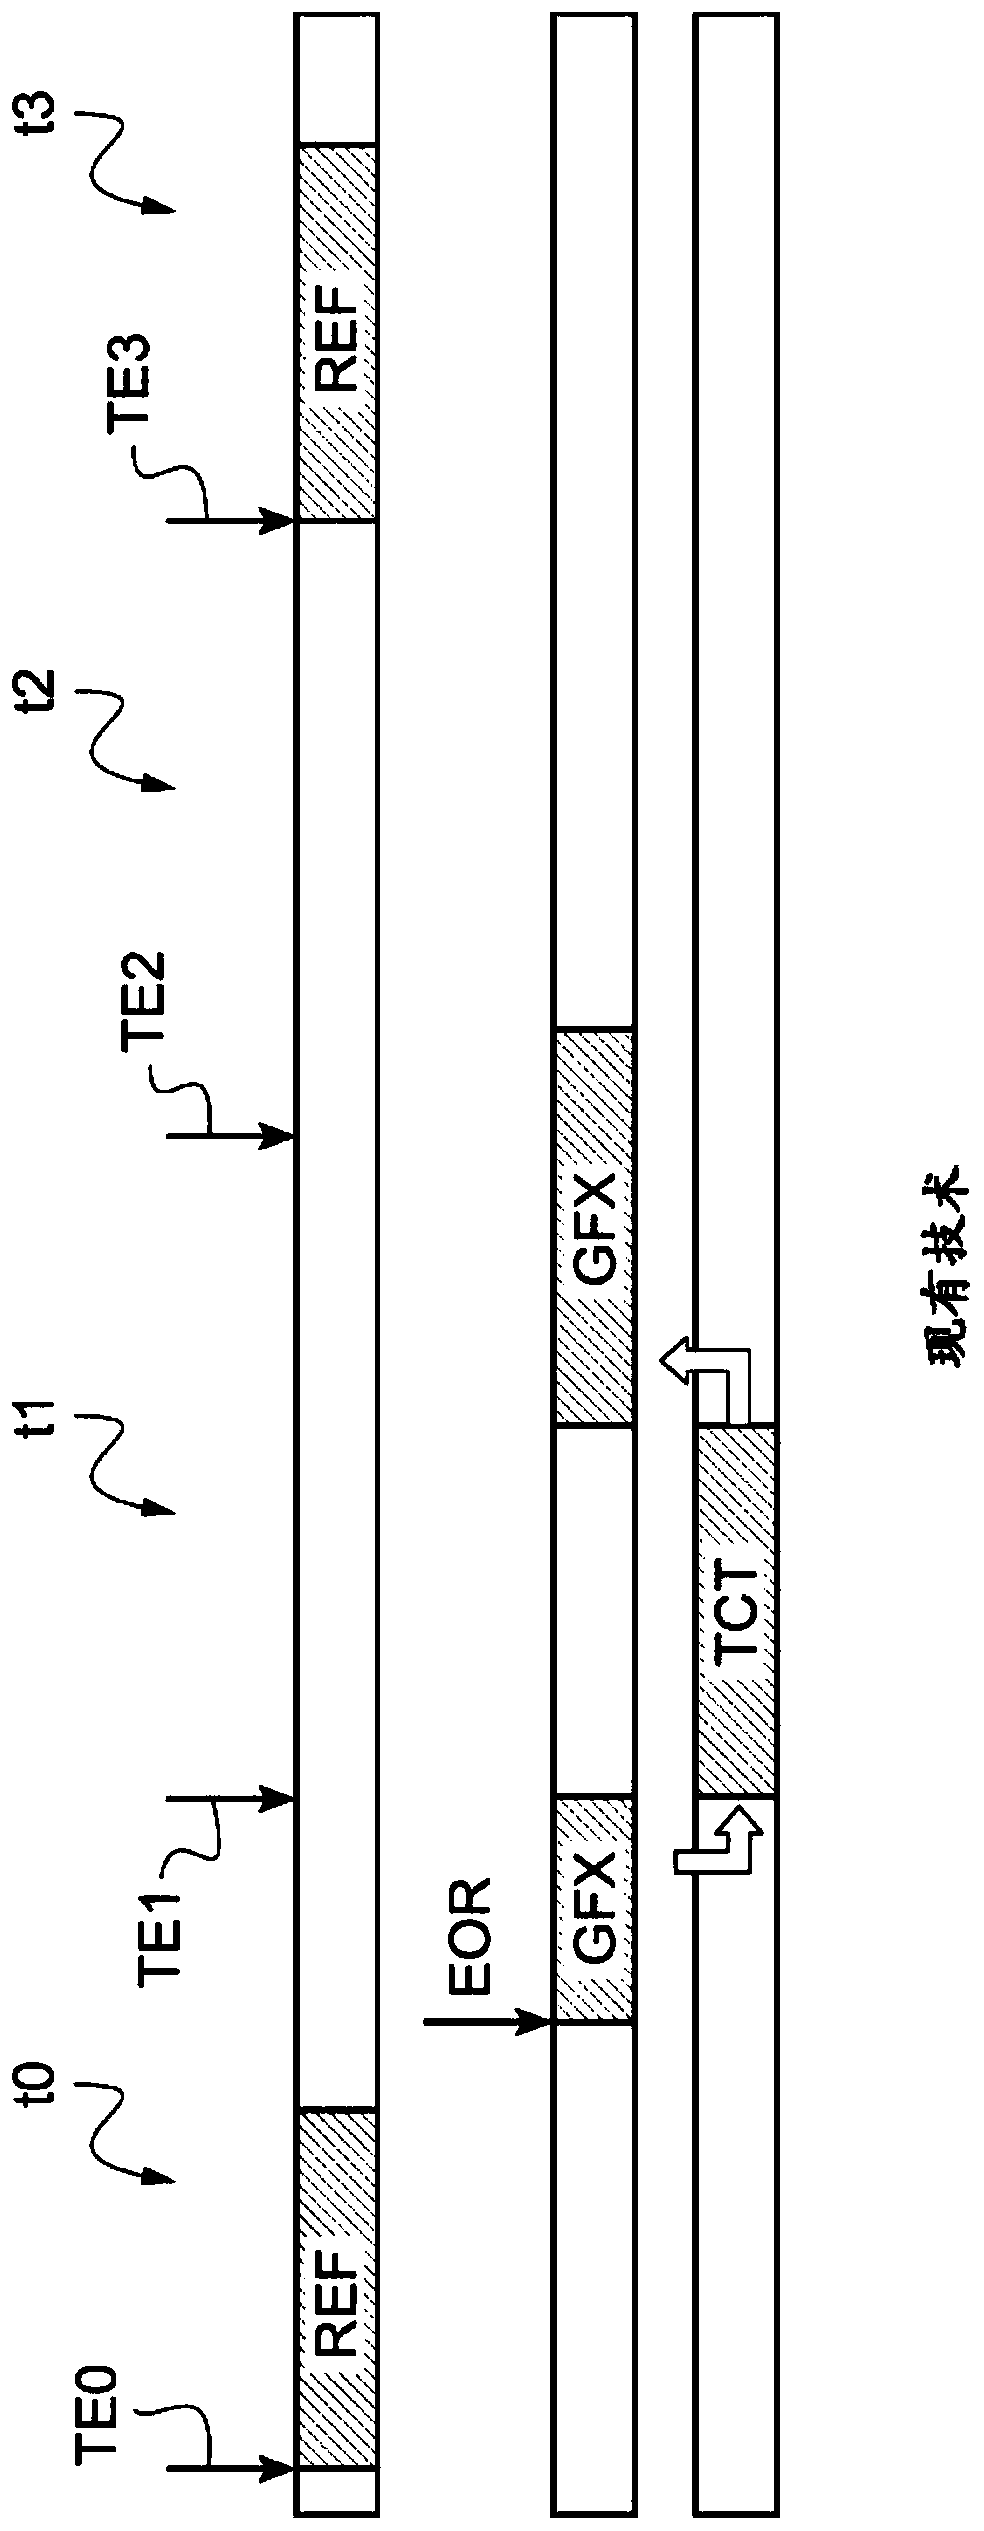 Method of generating trigger signal for controlling multimedia interface